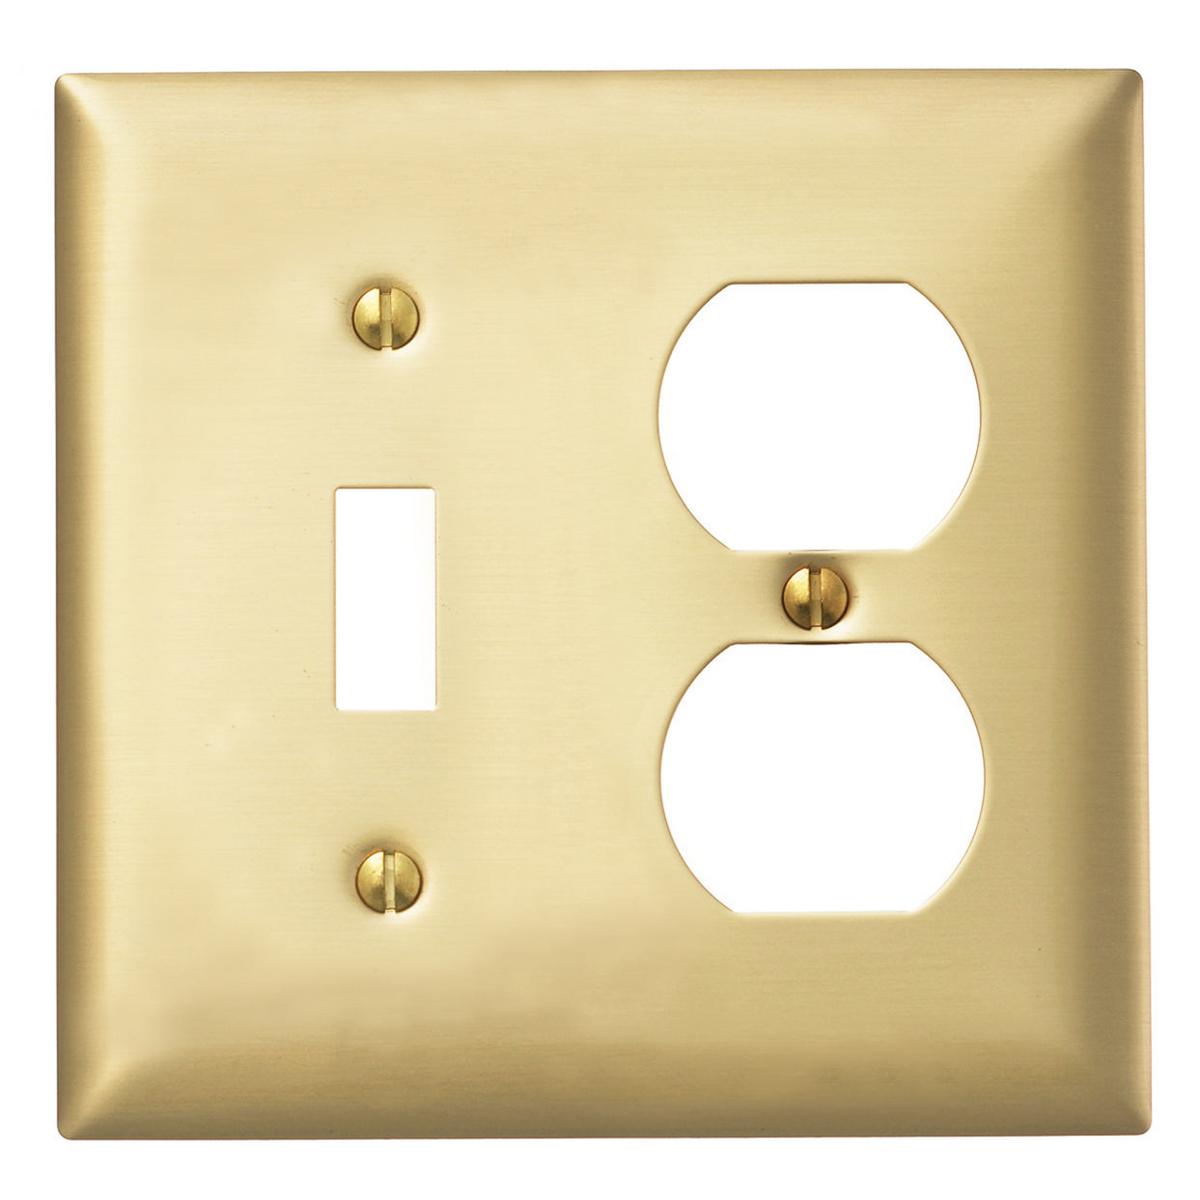 Hubbell SBP18 Wallplates and Boxes, Metallic Plates, 2- Gang, 1) Toggle Opening, 1) Duplex, Standard Size, Brass Plated Steel  ; Non-magnetic and corrosion resistant ; Finish is lacquer coated to inhibit oxidation ; Protective plastic film helps to prevent scratches an